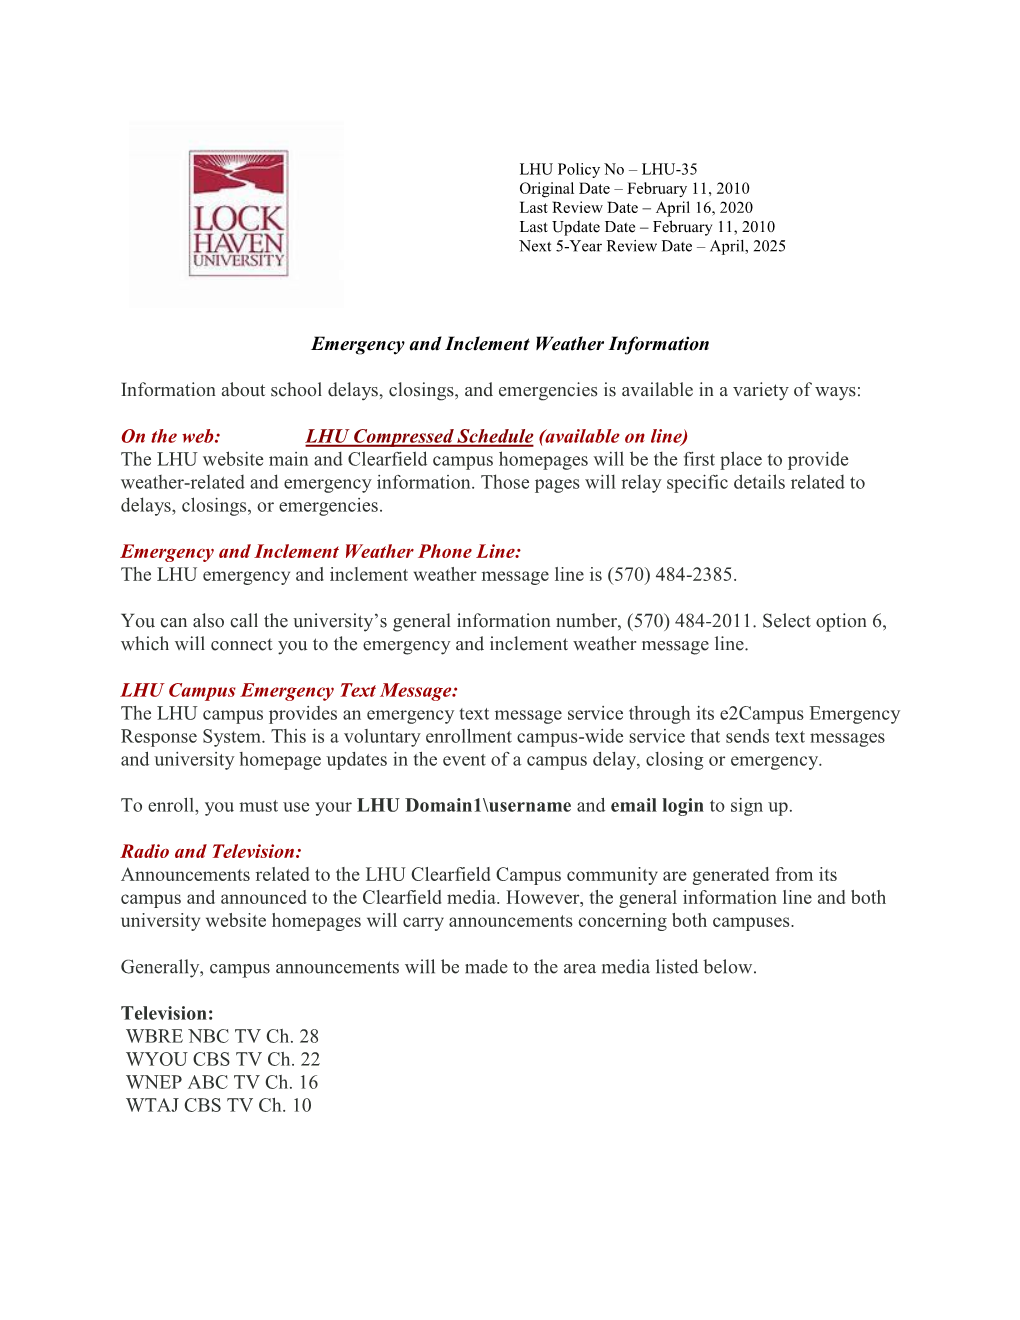 Emergency and Inclement Weather Information Information About